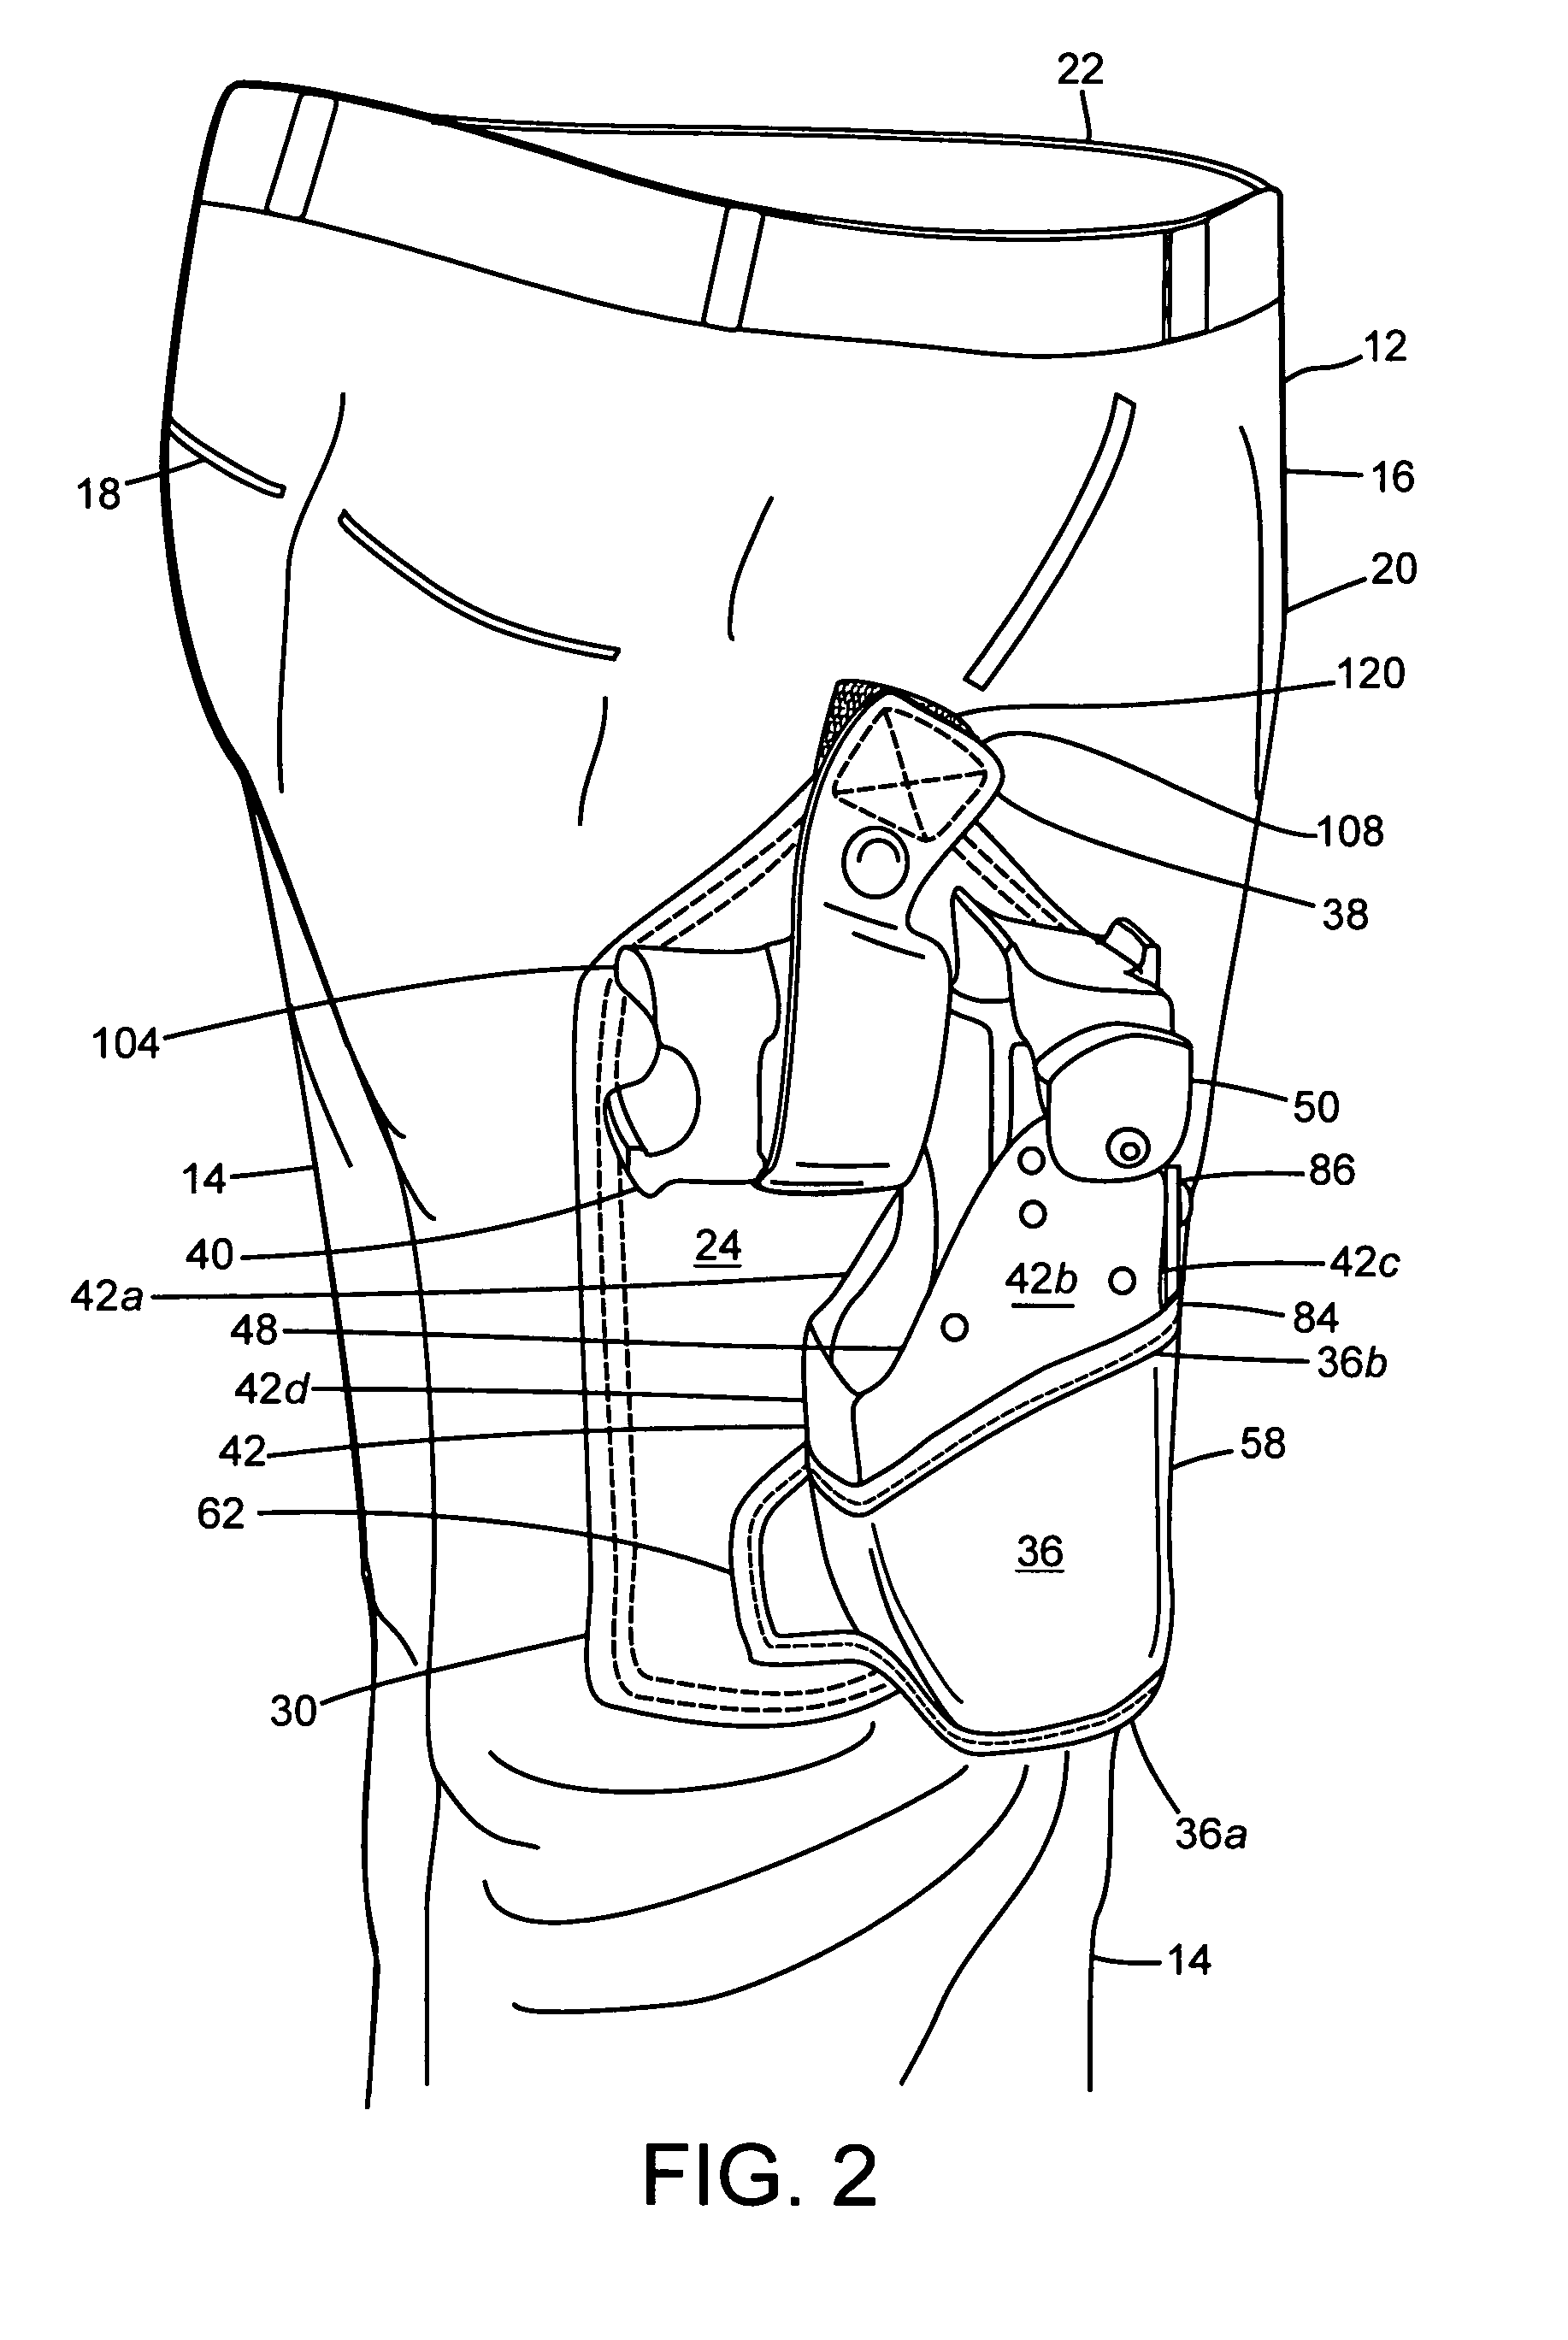 Holster assembly for integral attachment to a garment